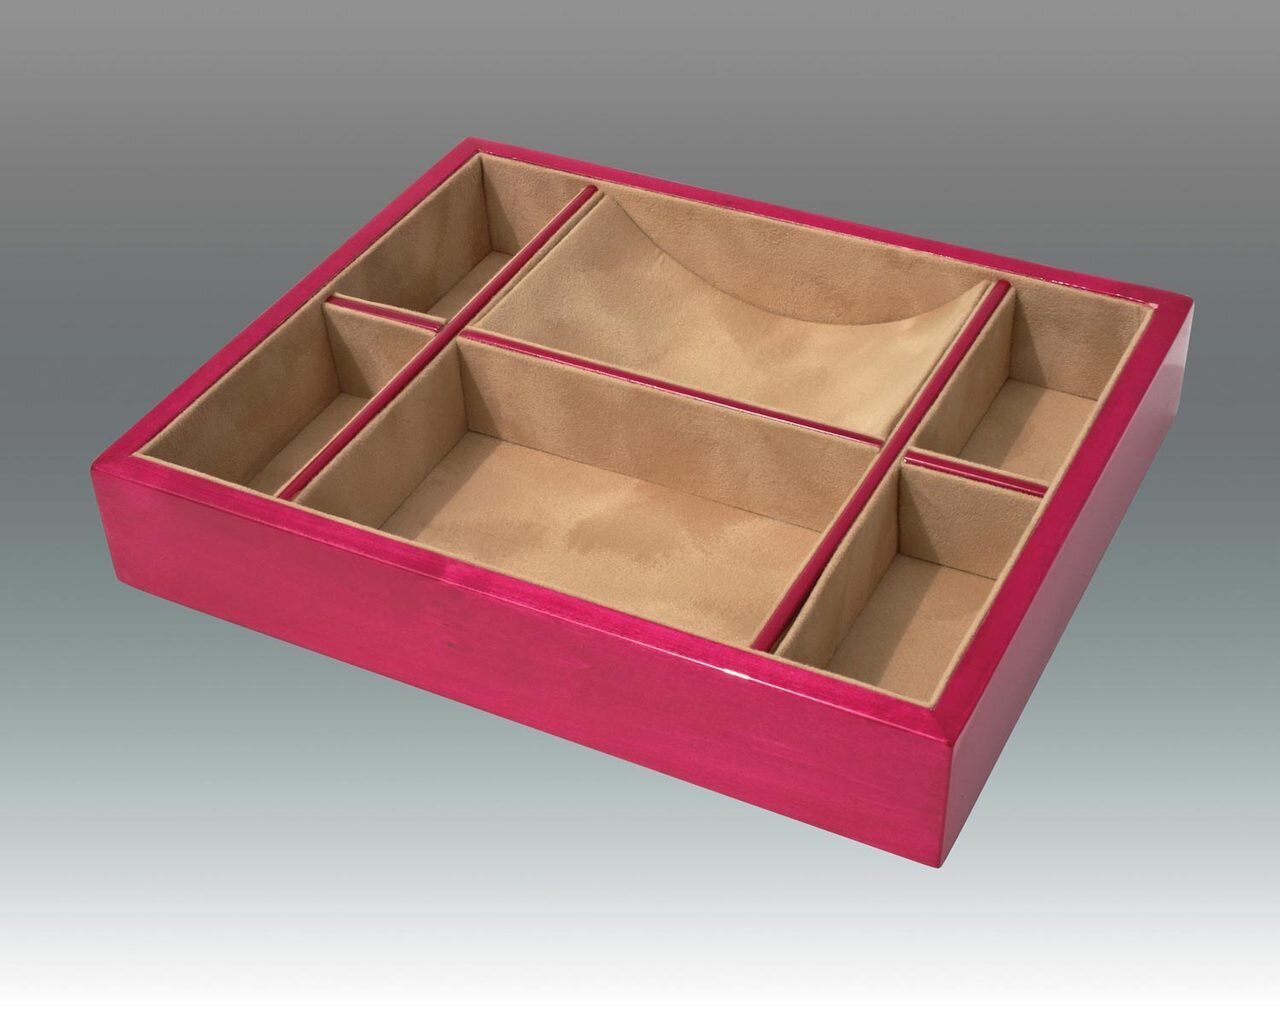 Tizo 10.25 x 8.25 Inch Sectional Wooden Valet Tray - Pink